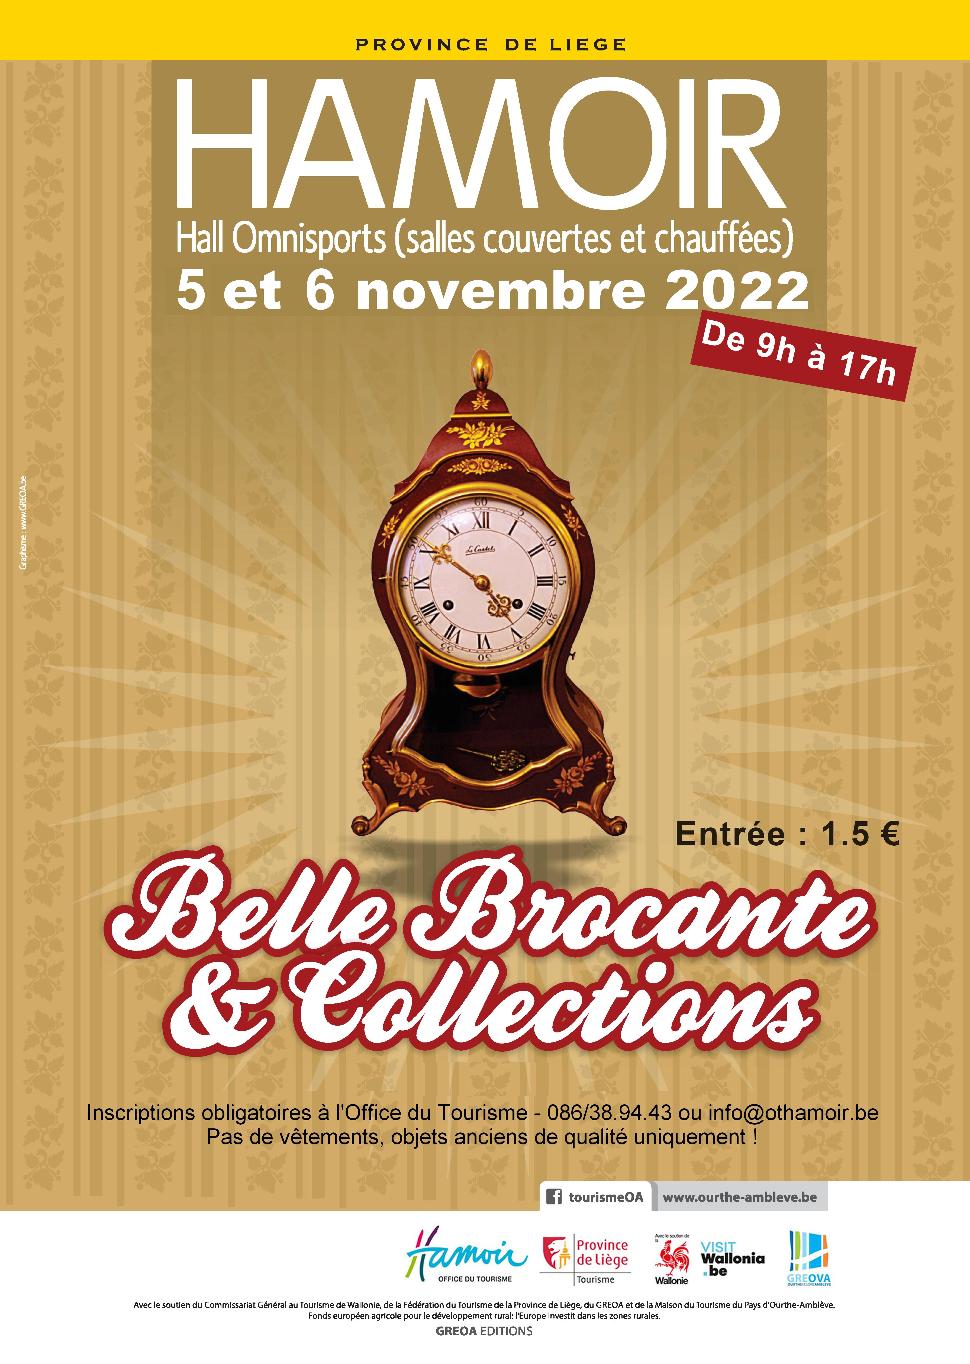 Belle brocante et collections